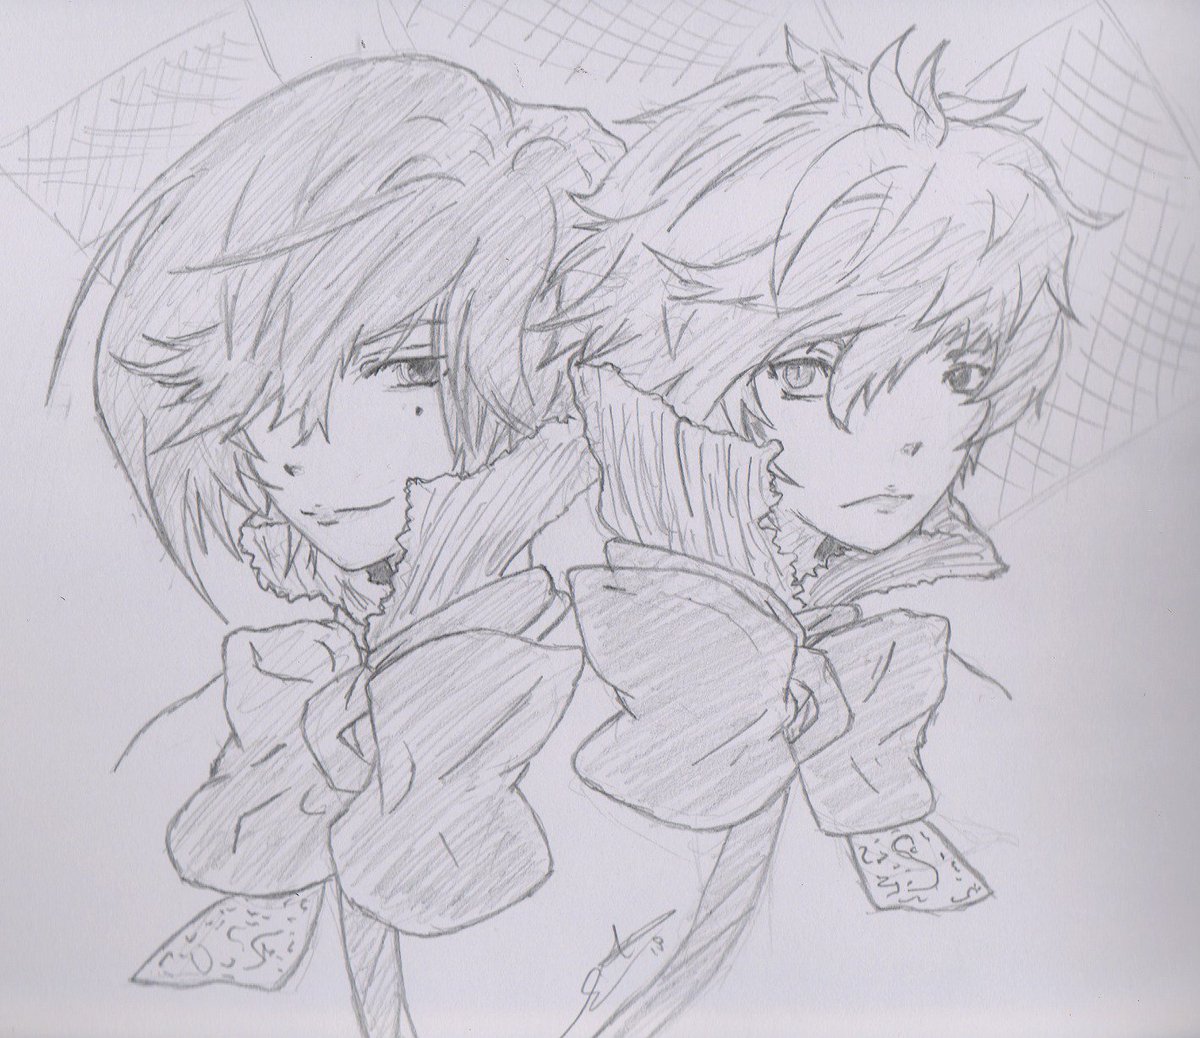 Suzanne Messy Sketch Of Rolf And Richard From 終極のdolls Rejet Fanart